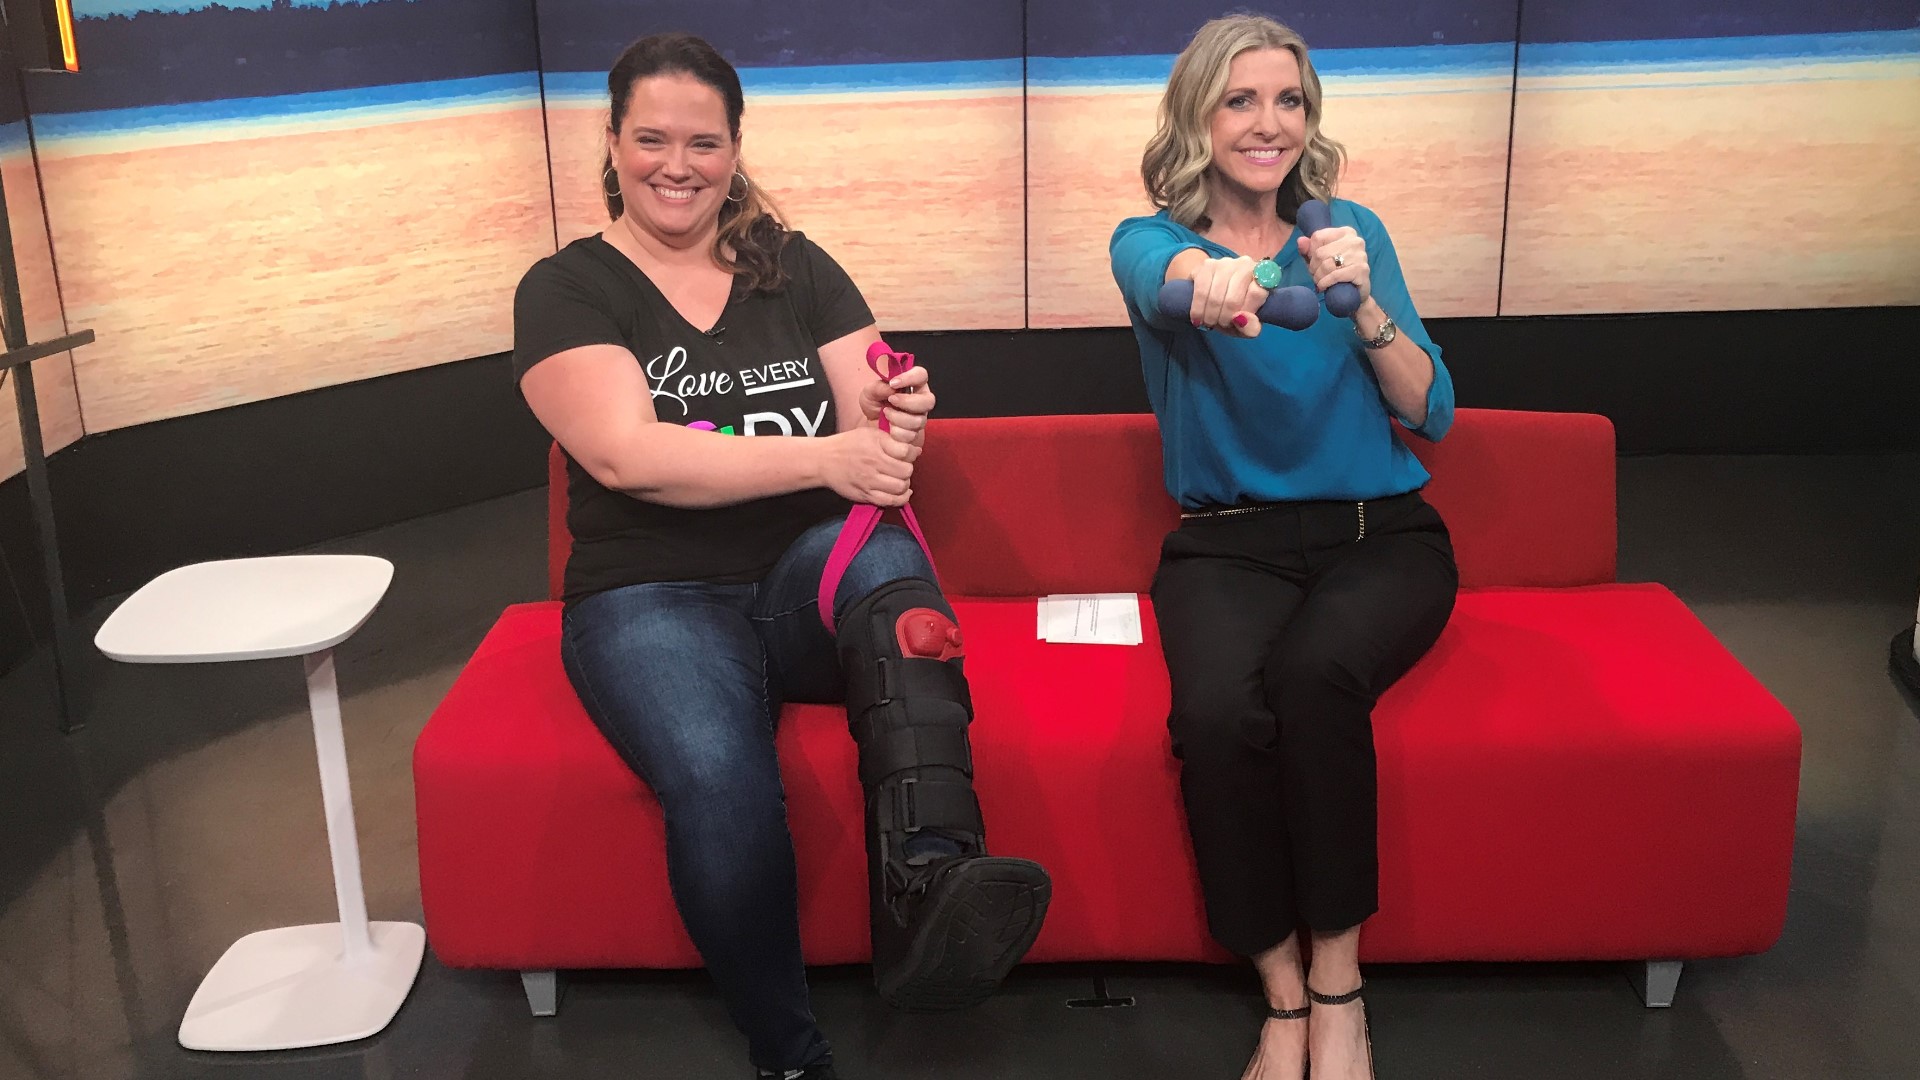 Recovering from surgery or injury means workouts go on hold. Trainer/Owner of Tacoma's Fitness for Life, Nikki Staab, shows us what you can do while waiting to heal.